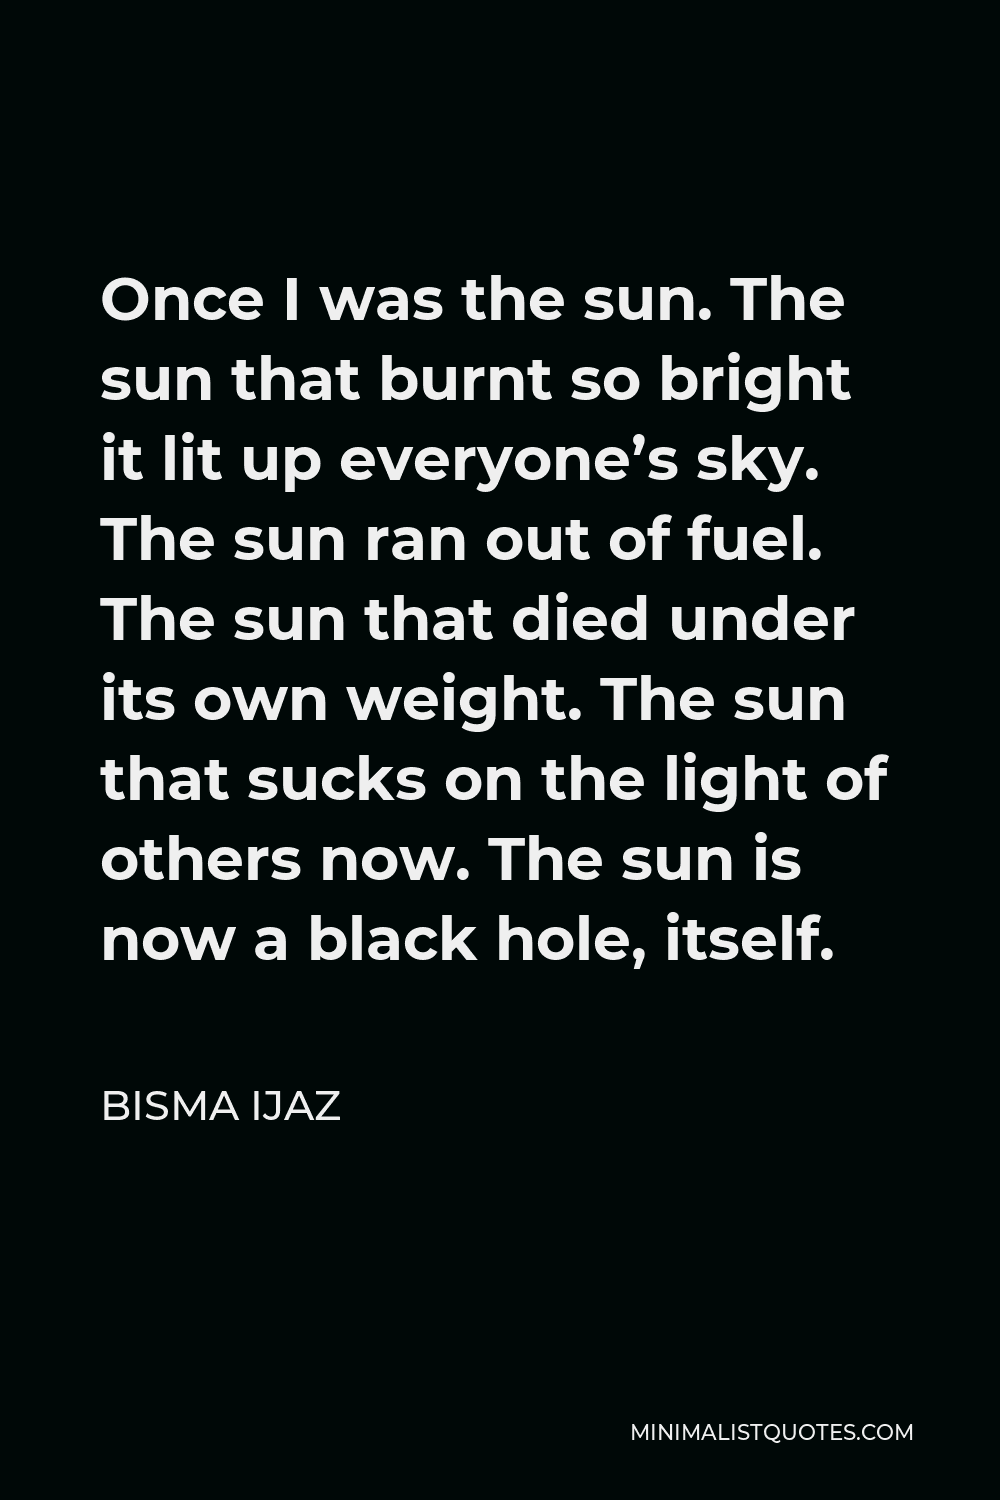 Bisma Ijaz Quote - Once I was the sun. The sun that burnt so bright it lit up everyone’s sky. The sun ran out of fuel. The sun that died under its own weight. The sun that sucks on the light of others now. The sun is now a black hole, itself.